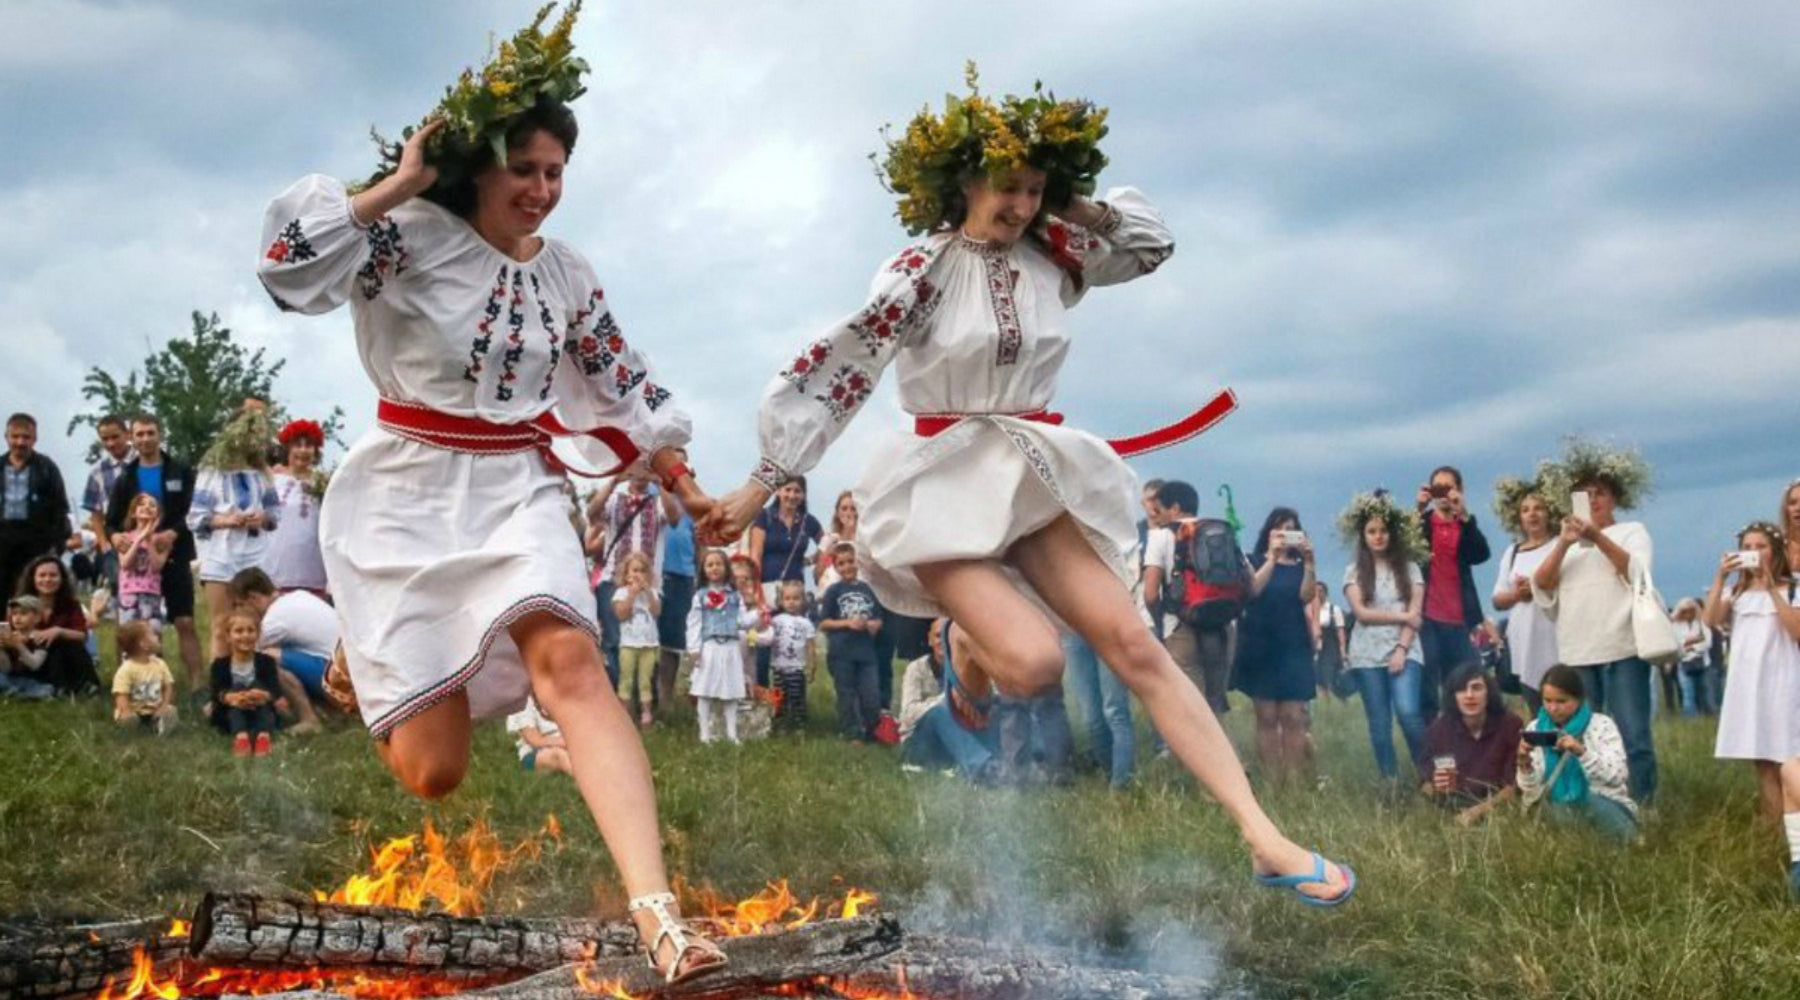 Slavic Native Faith - The best known and dramatic among numerous Slavic pagan fire ritual - jumping over the bonfire on the Kupala Night.